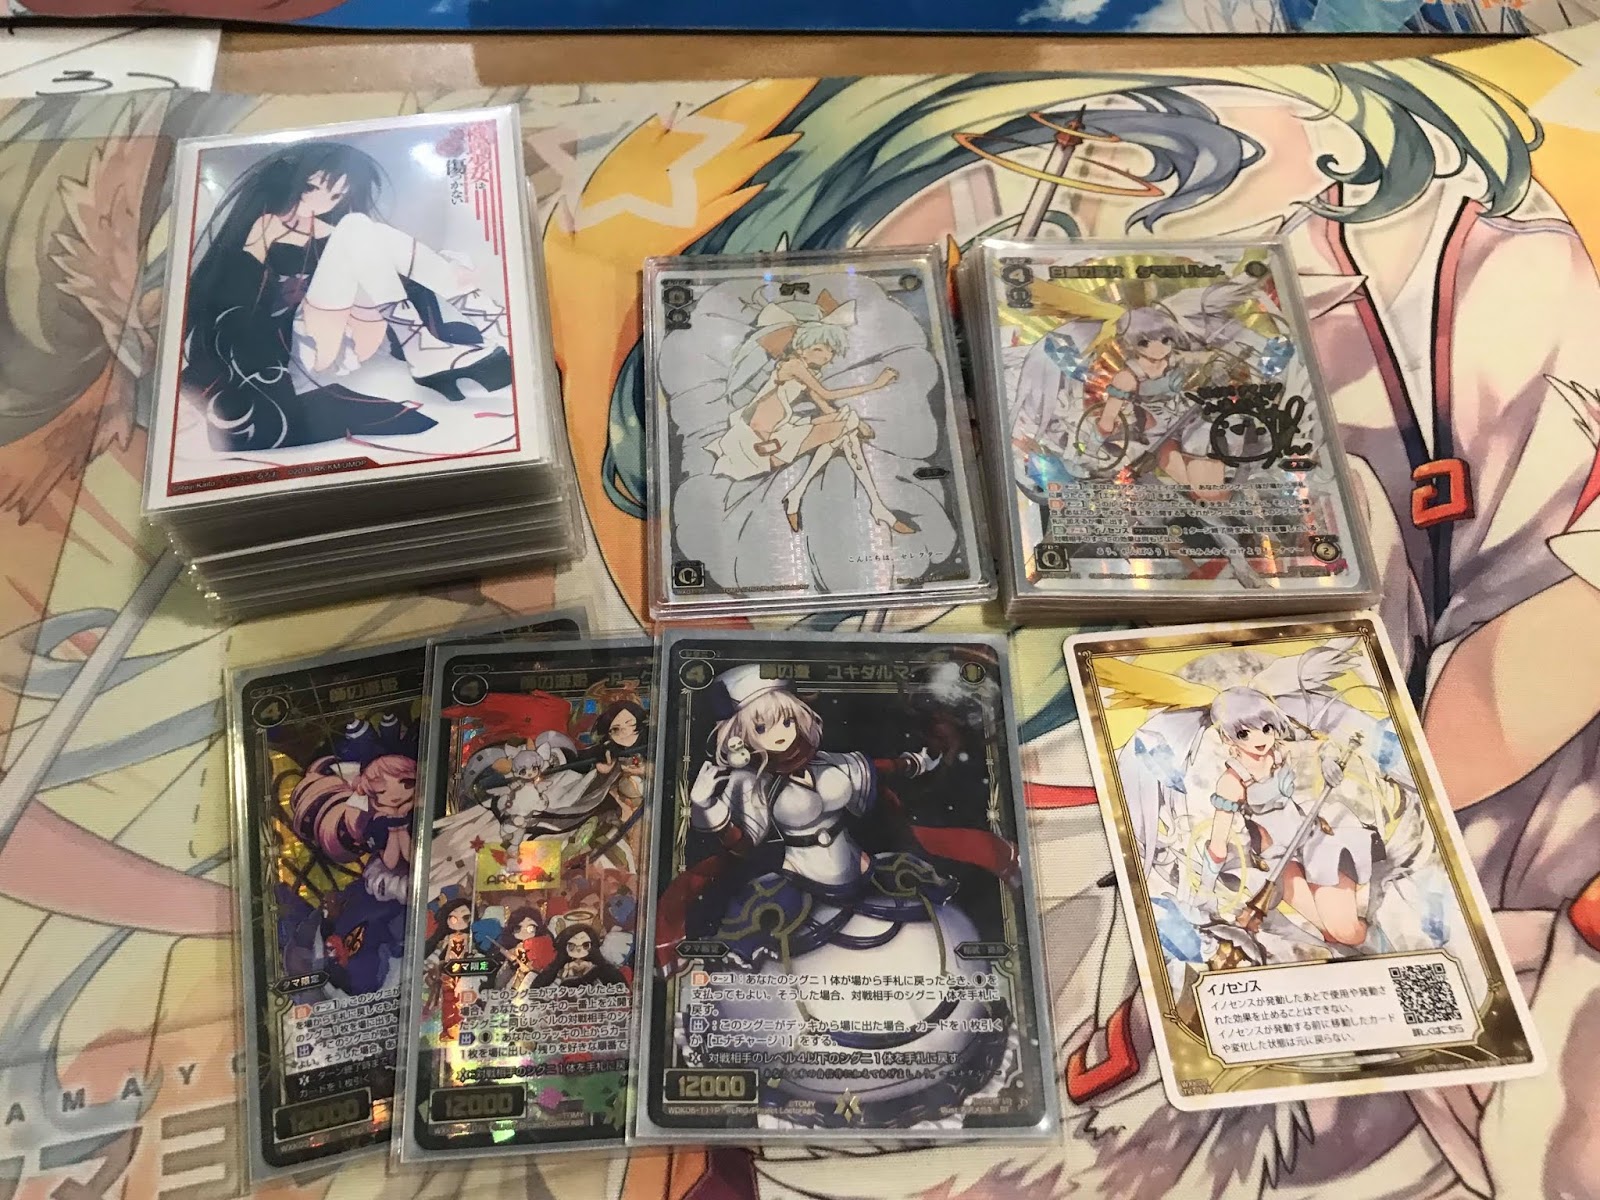  Wixoss Party July Exclusive